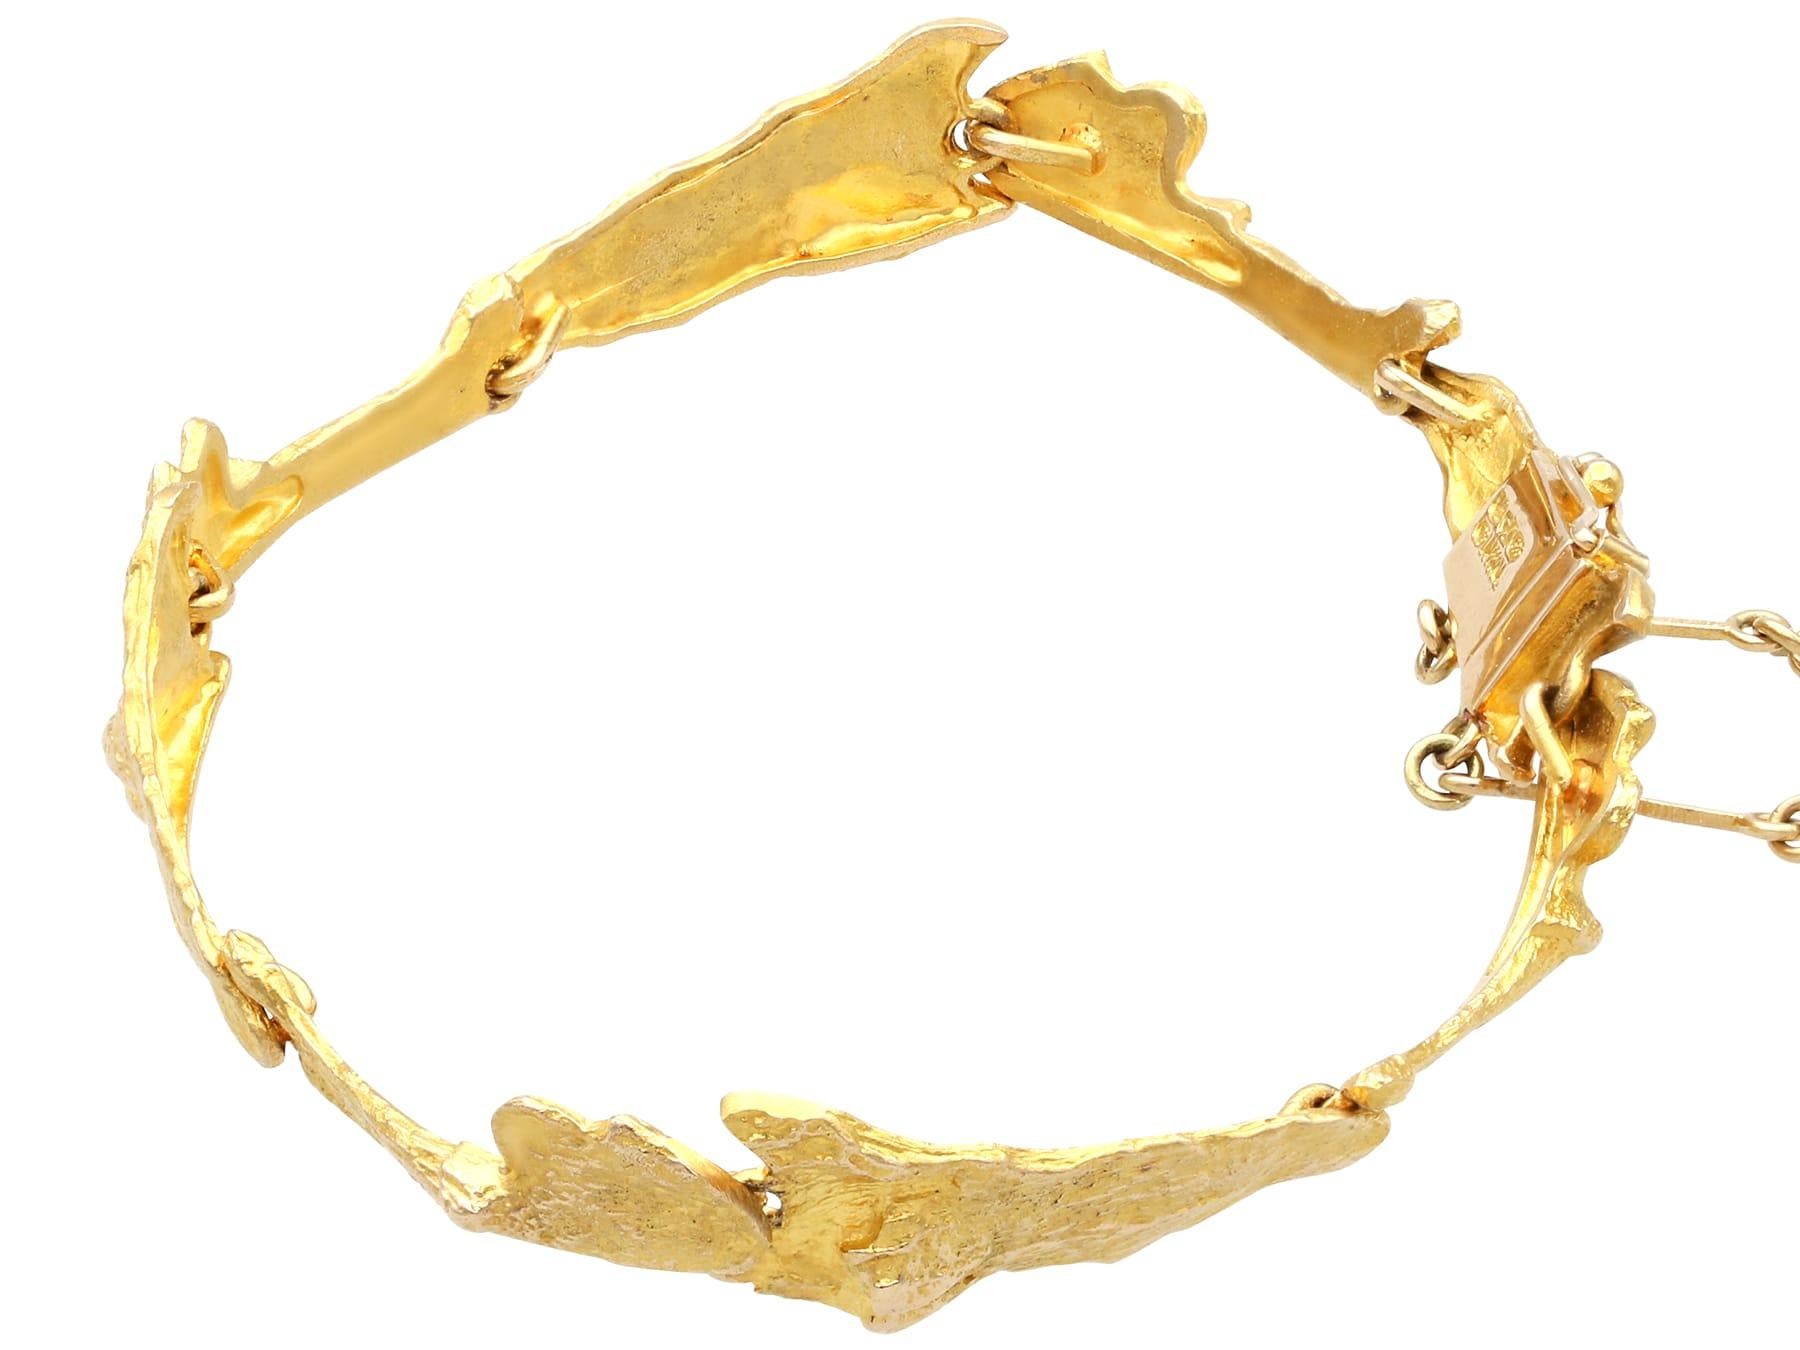 Vintage Laponnia 14k Yellow Gold Bracelet In Excellent Condition For Sale In Jesmond, Newcastle Upon Tyne